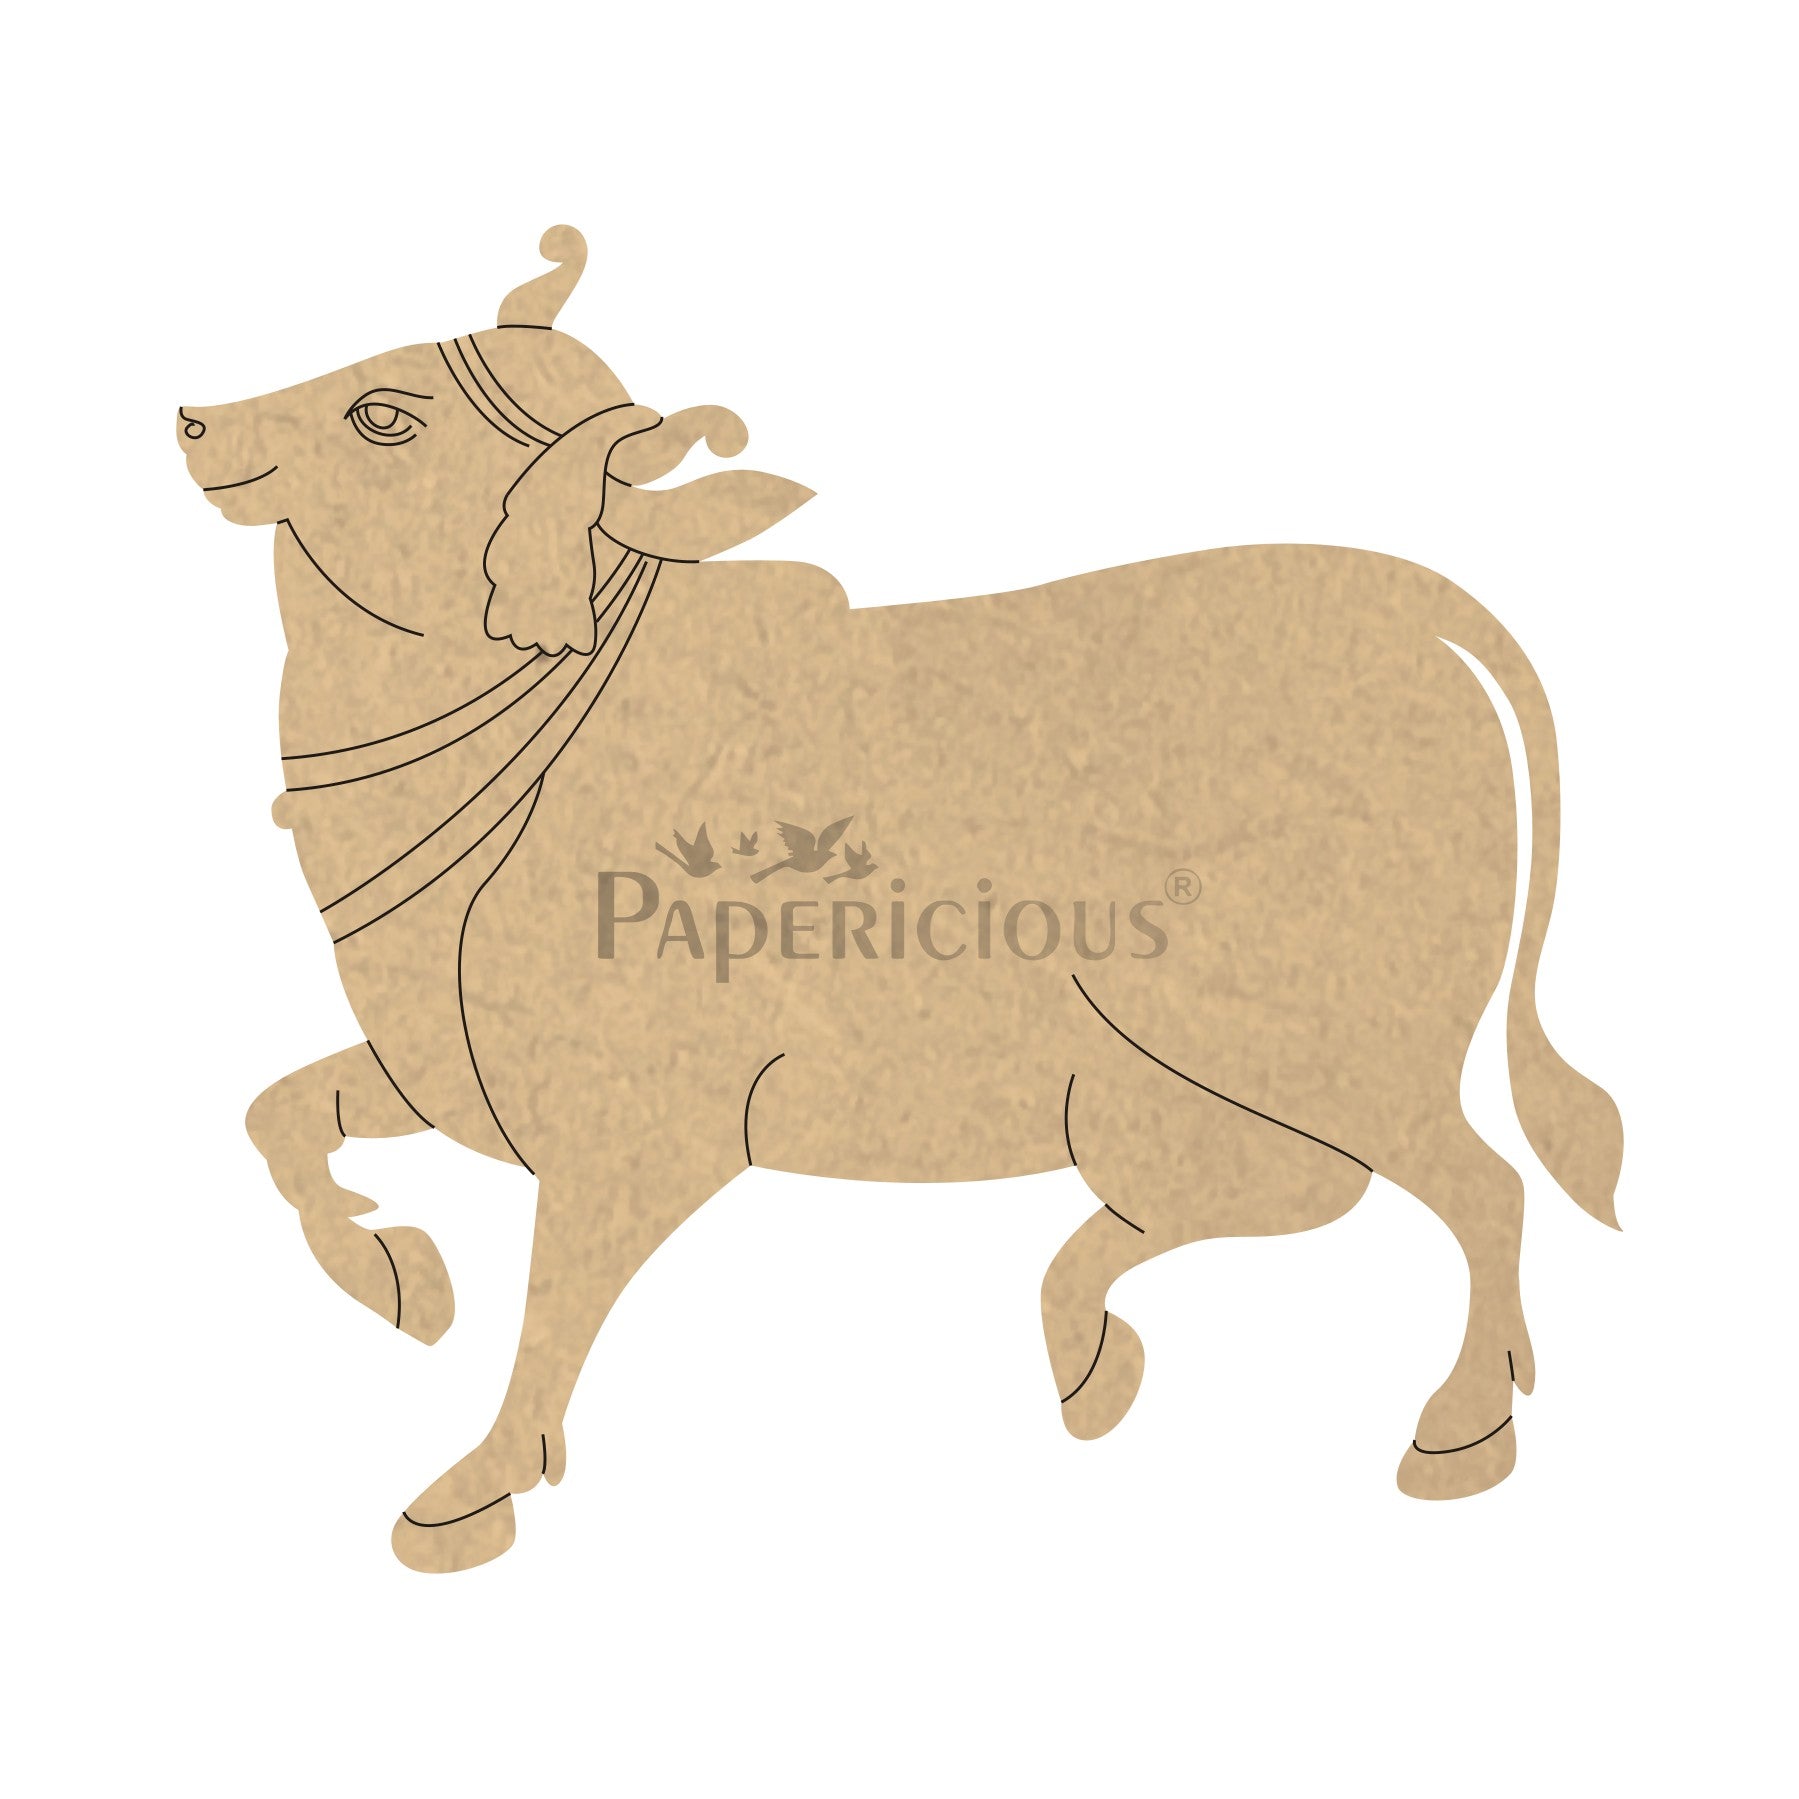 PAPERICIOUS 4mm thick Pre Marked MDF Base Pichwai Cow